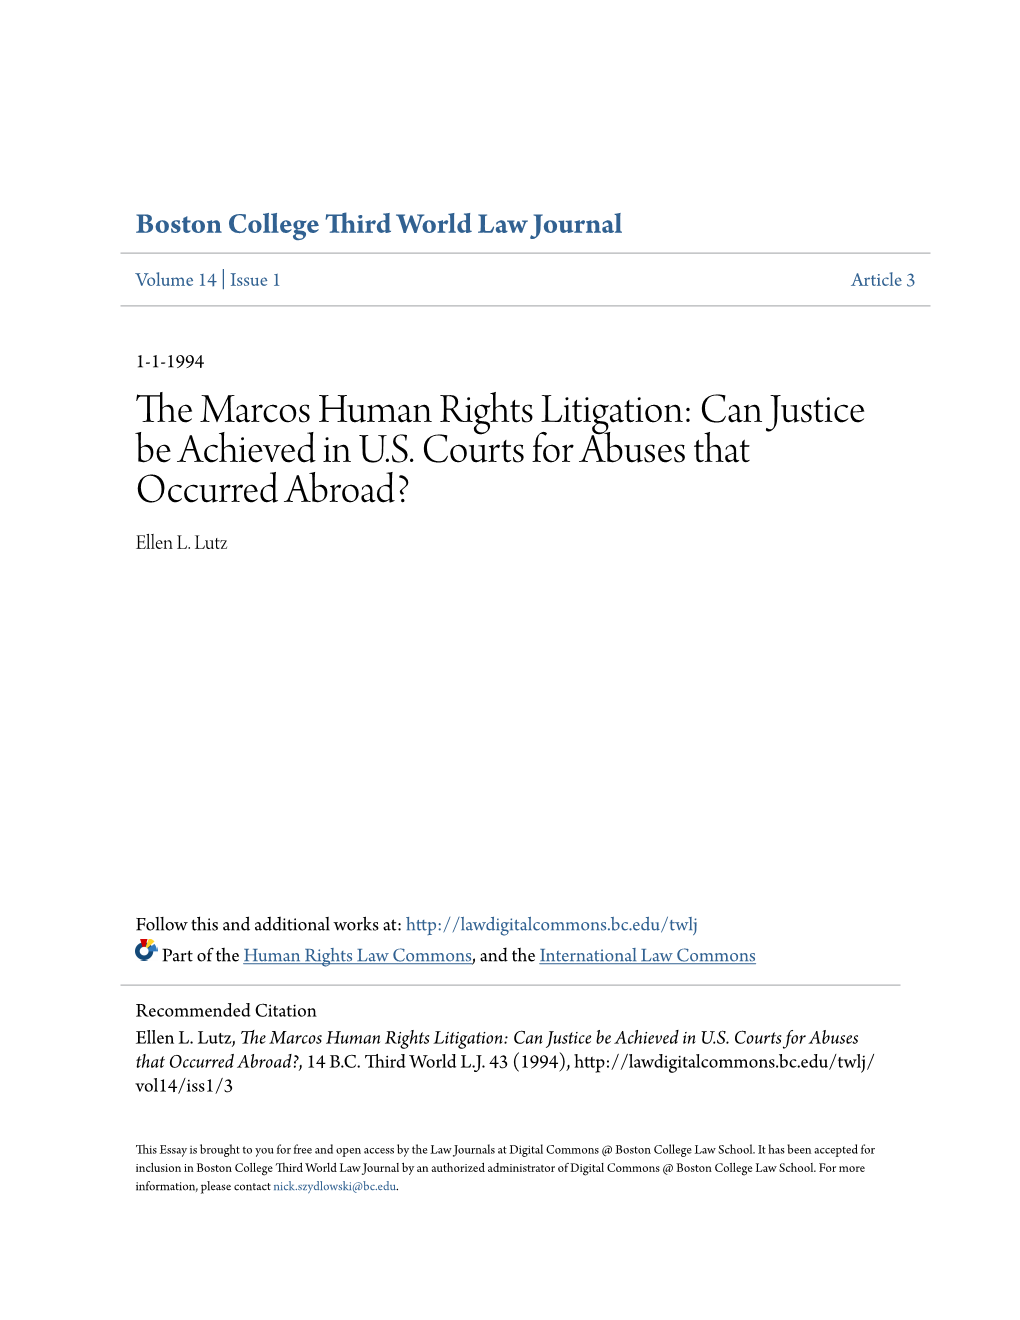 The Marcos Human Rights Litigation: Can Justice Be Achieved in U.S